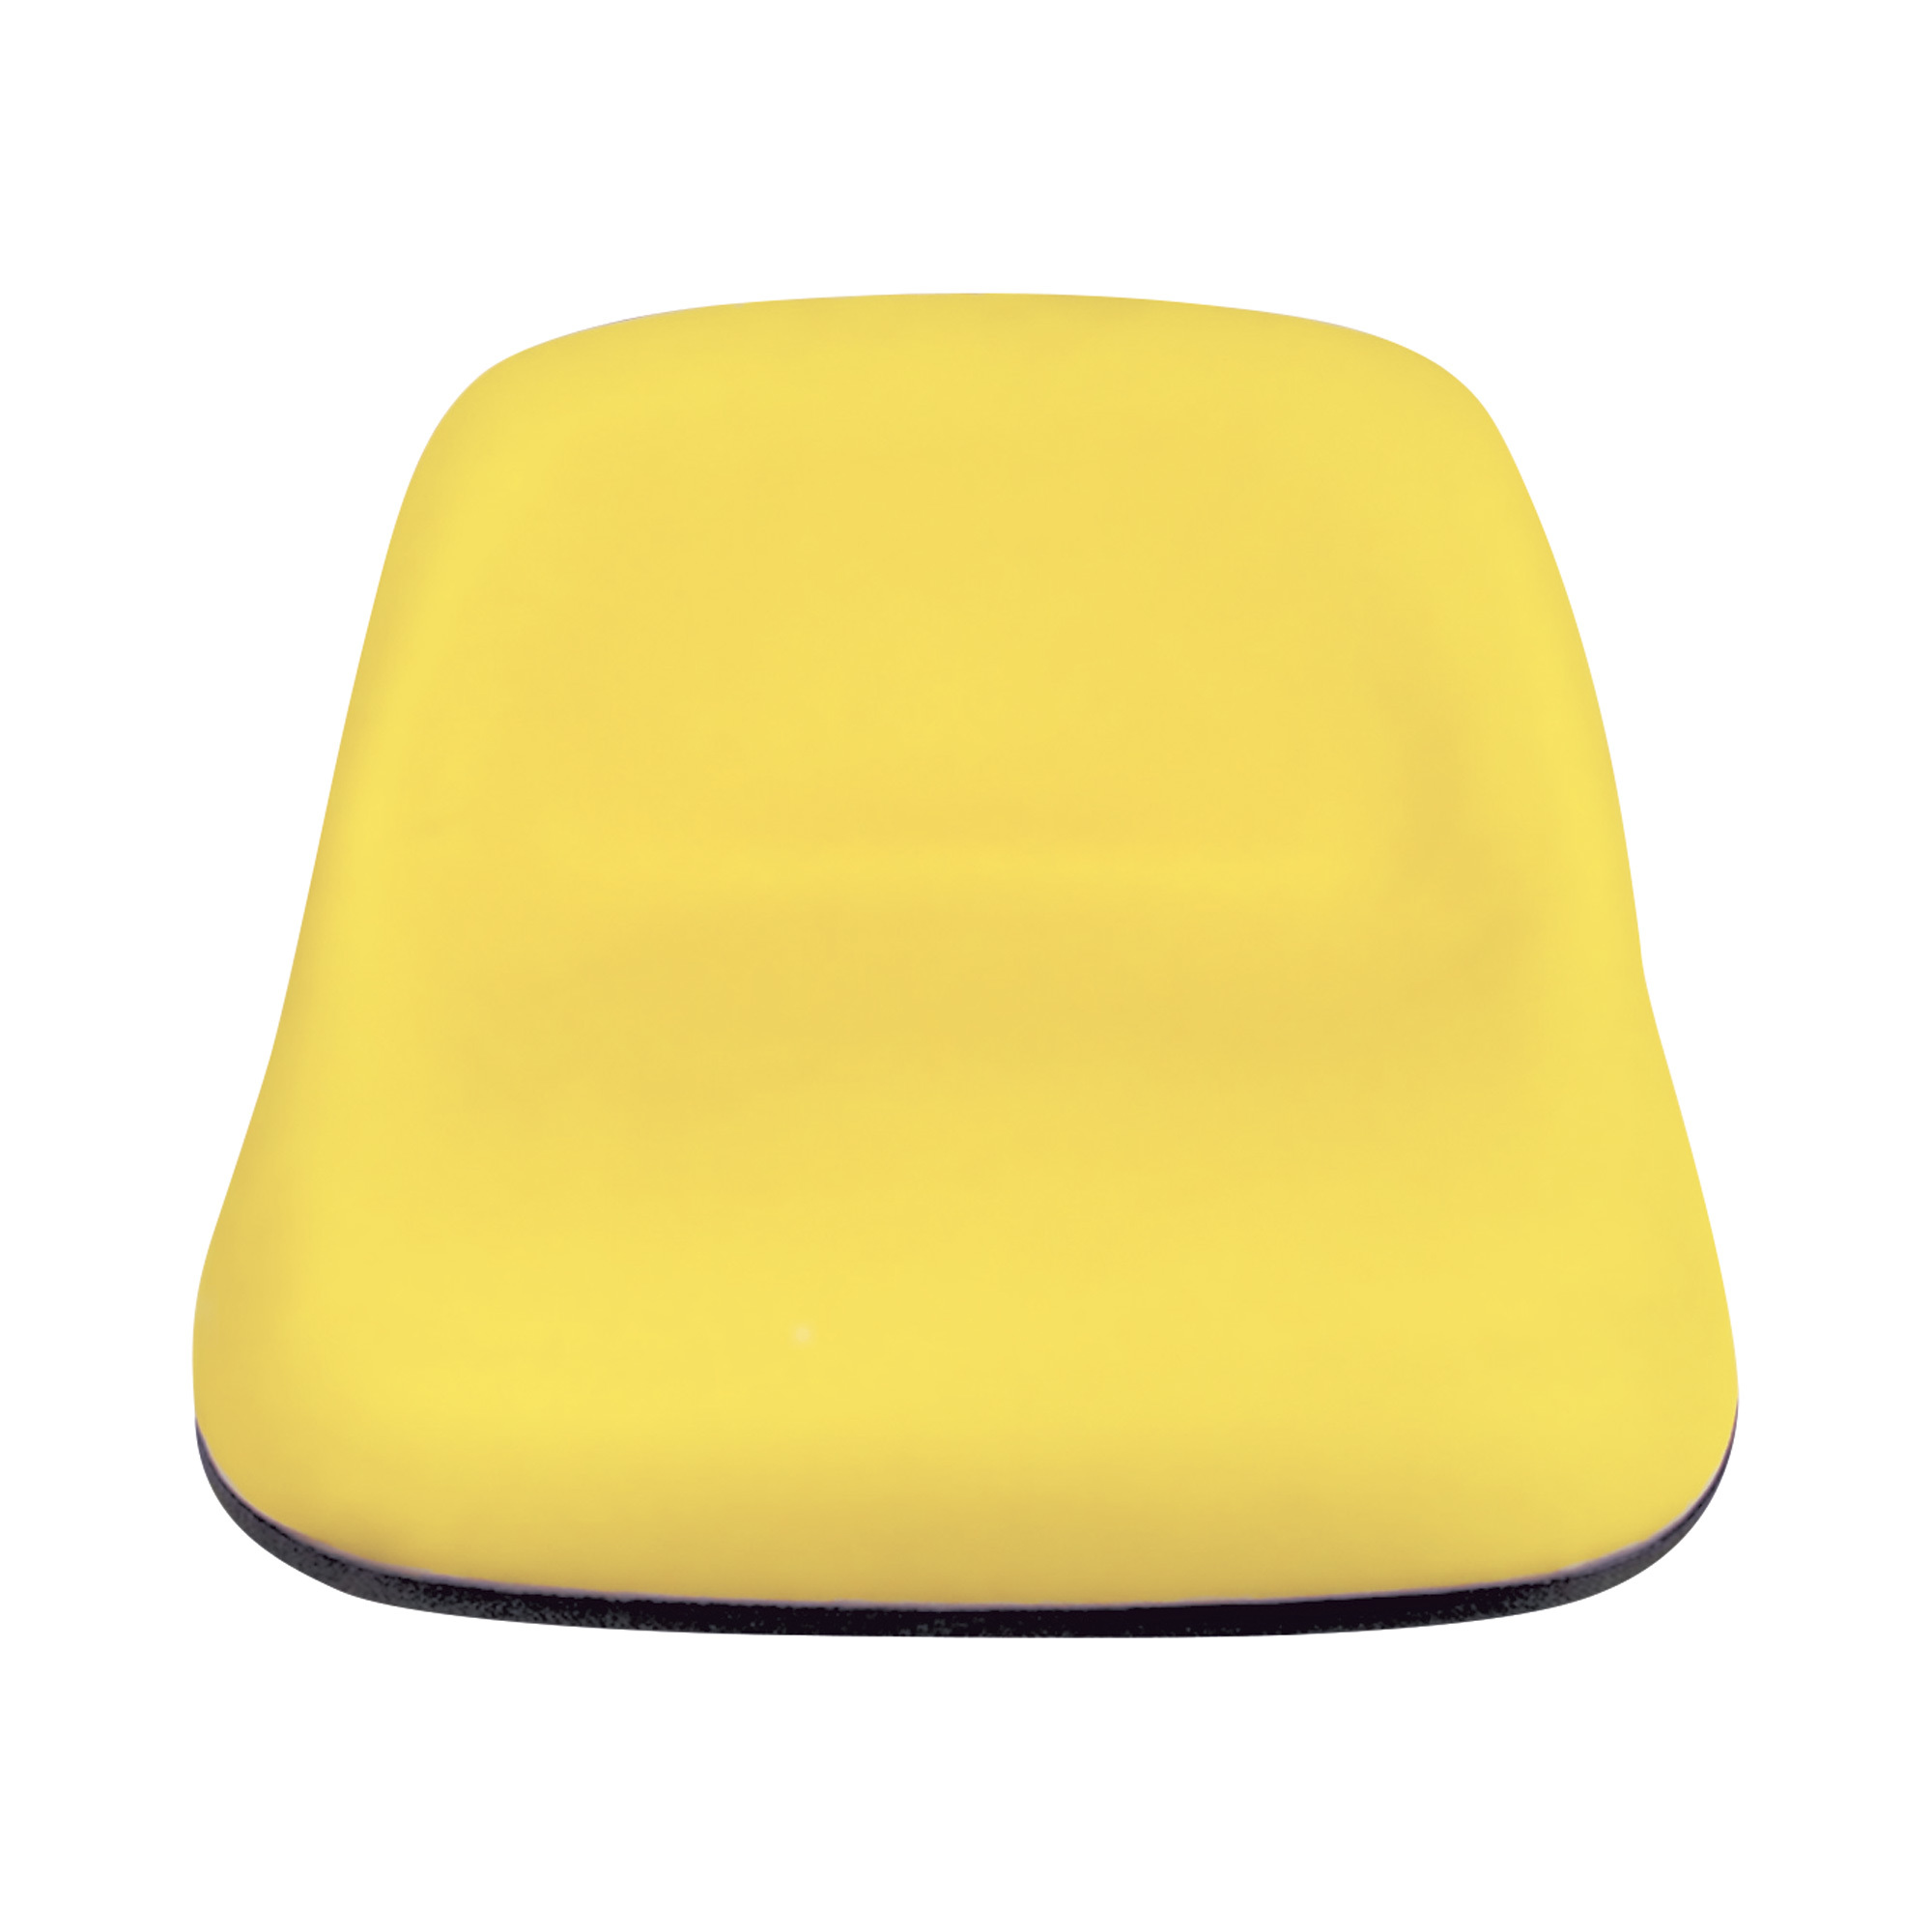 A & I Low-Back Universal Replacement Lawn Mower Seat â Yellow, Model LMS2002YL